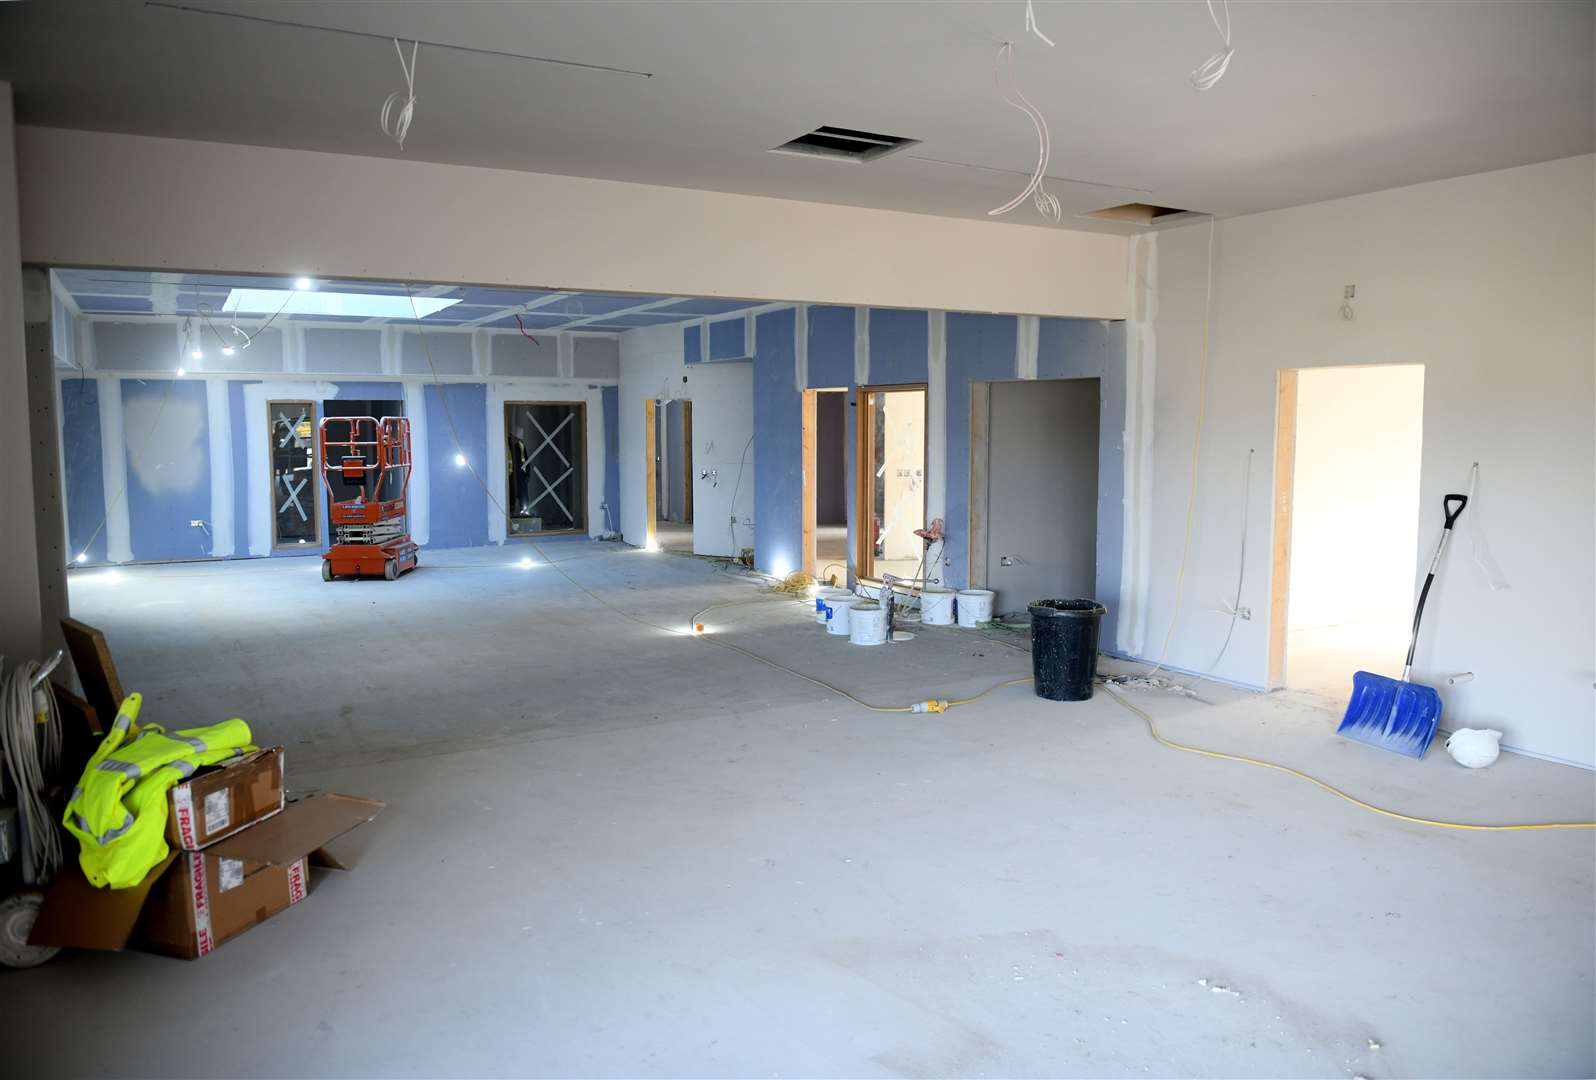 The interior of the Haven Centre starts to take shape.